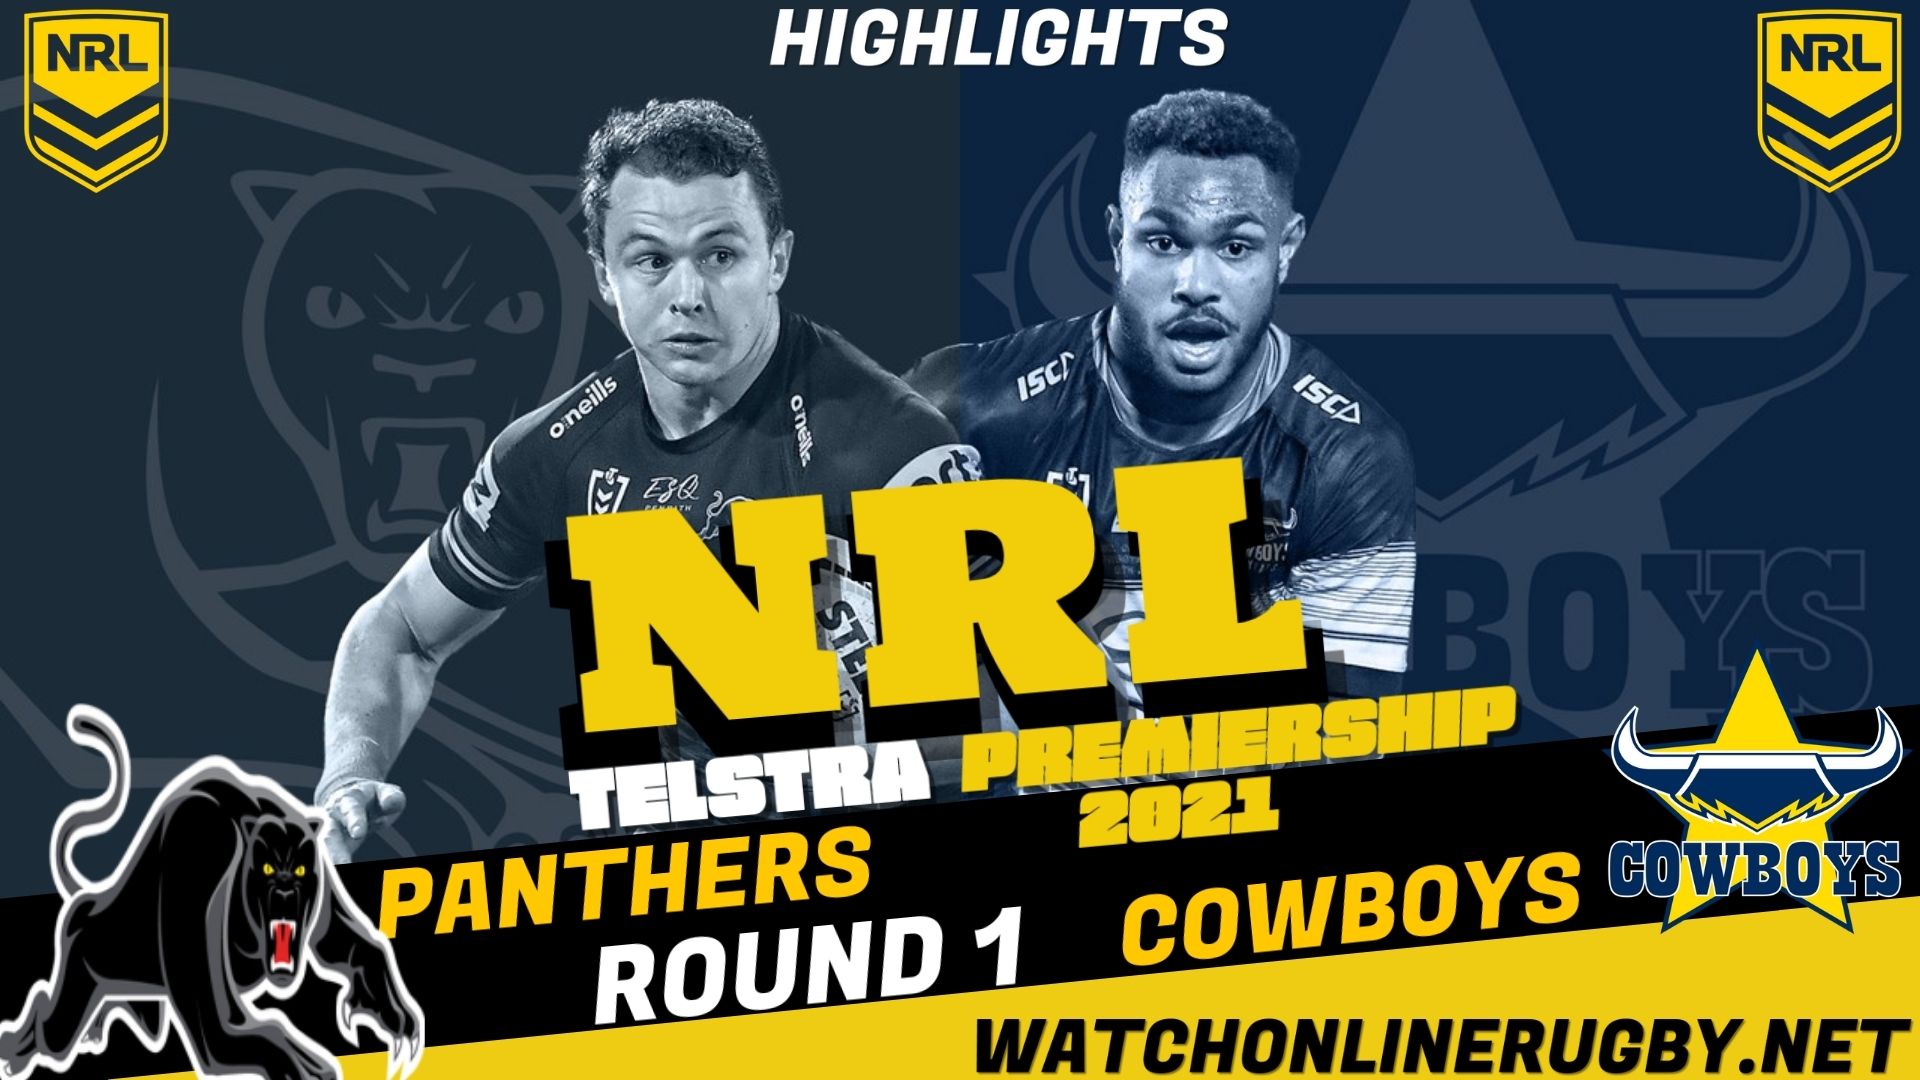 Panthers Vs Cowboys Highlights RD 1 NRL Rugby